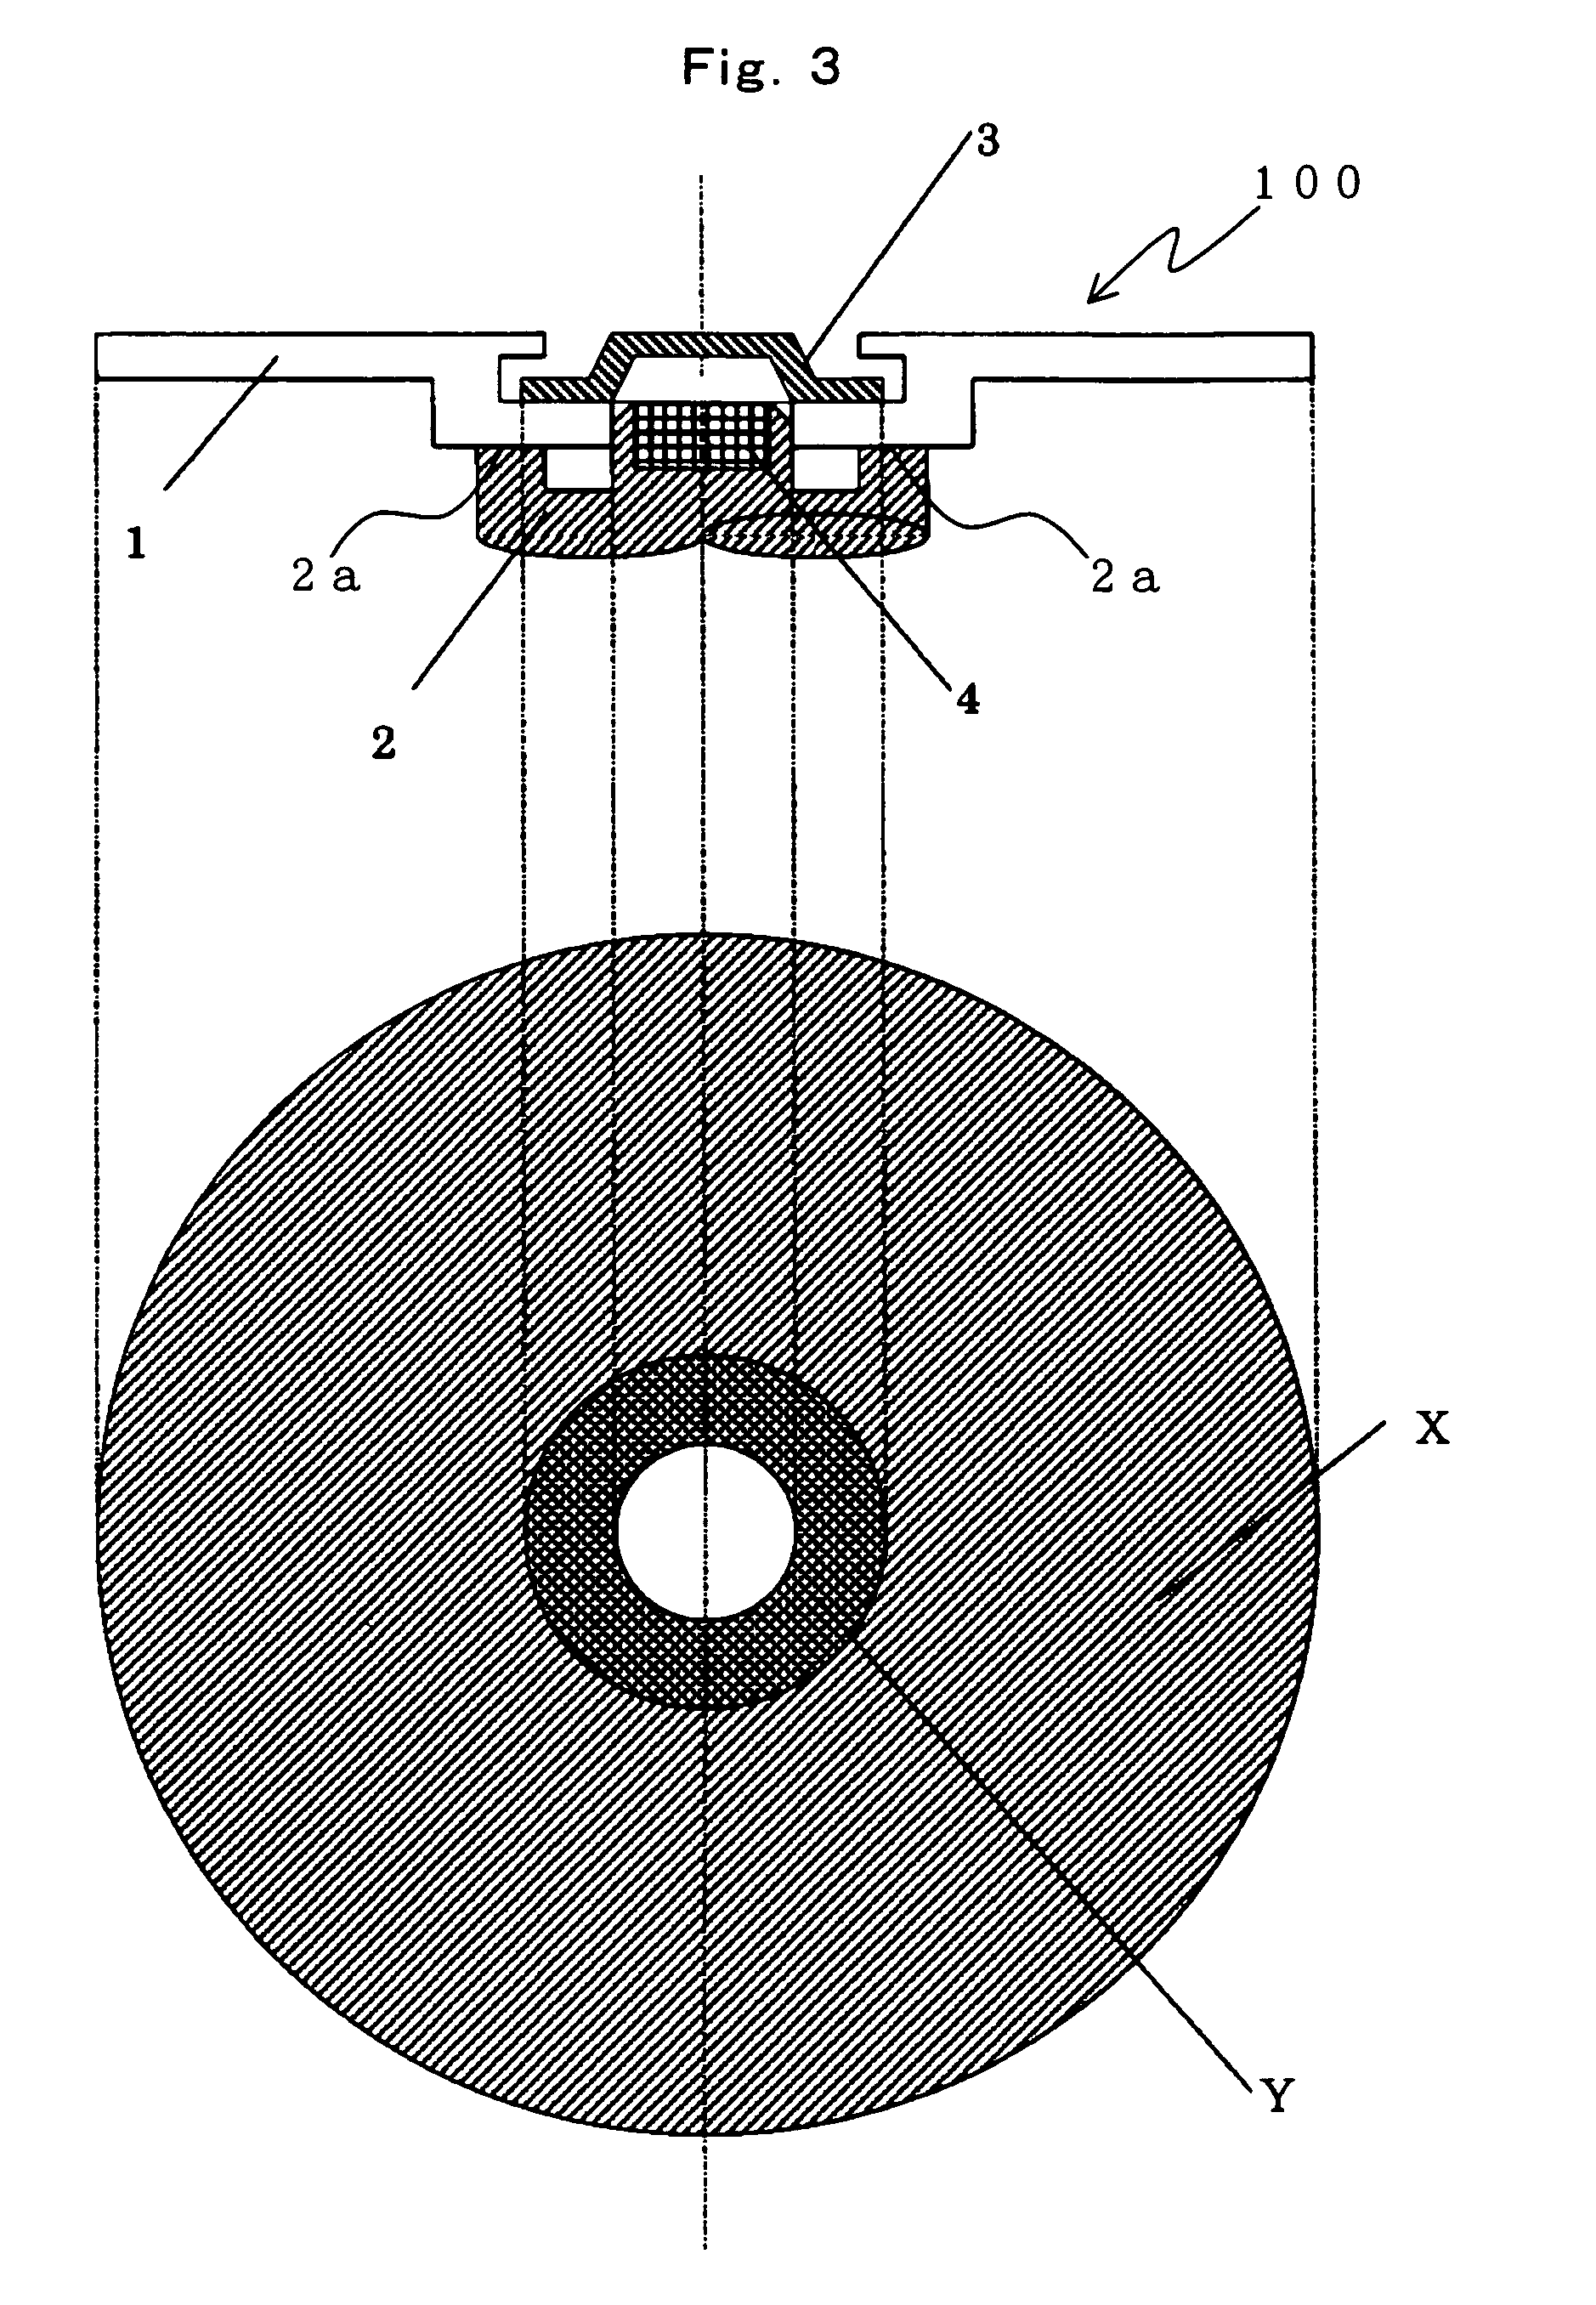 Optical disk, disk substrate, and drive